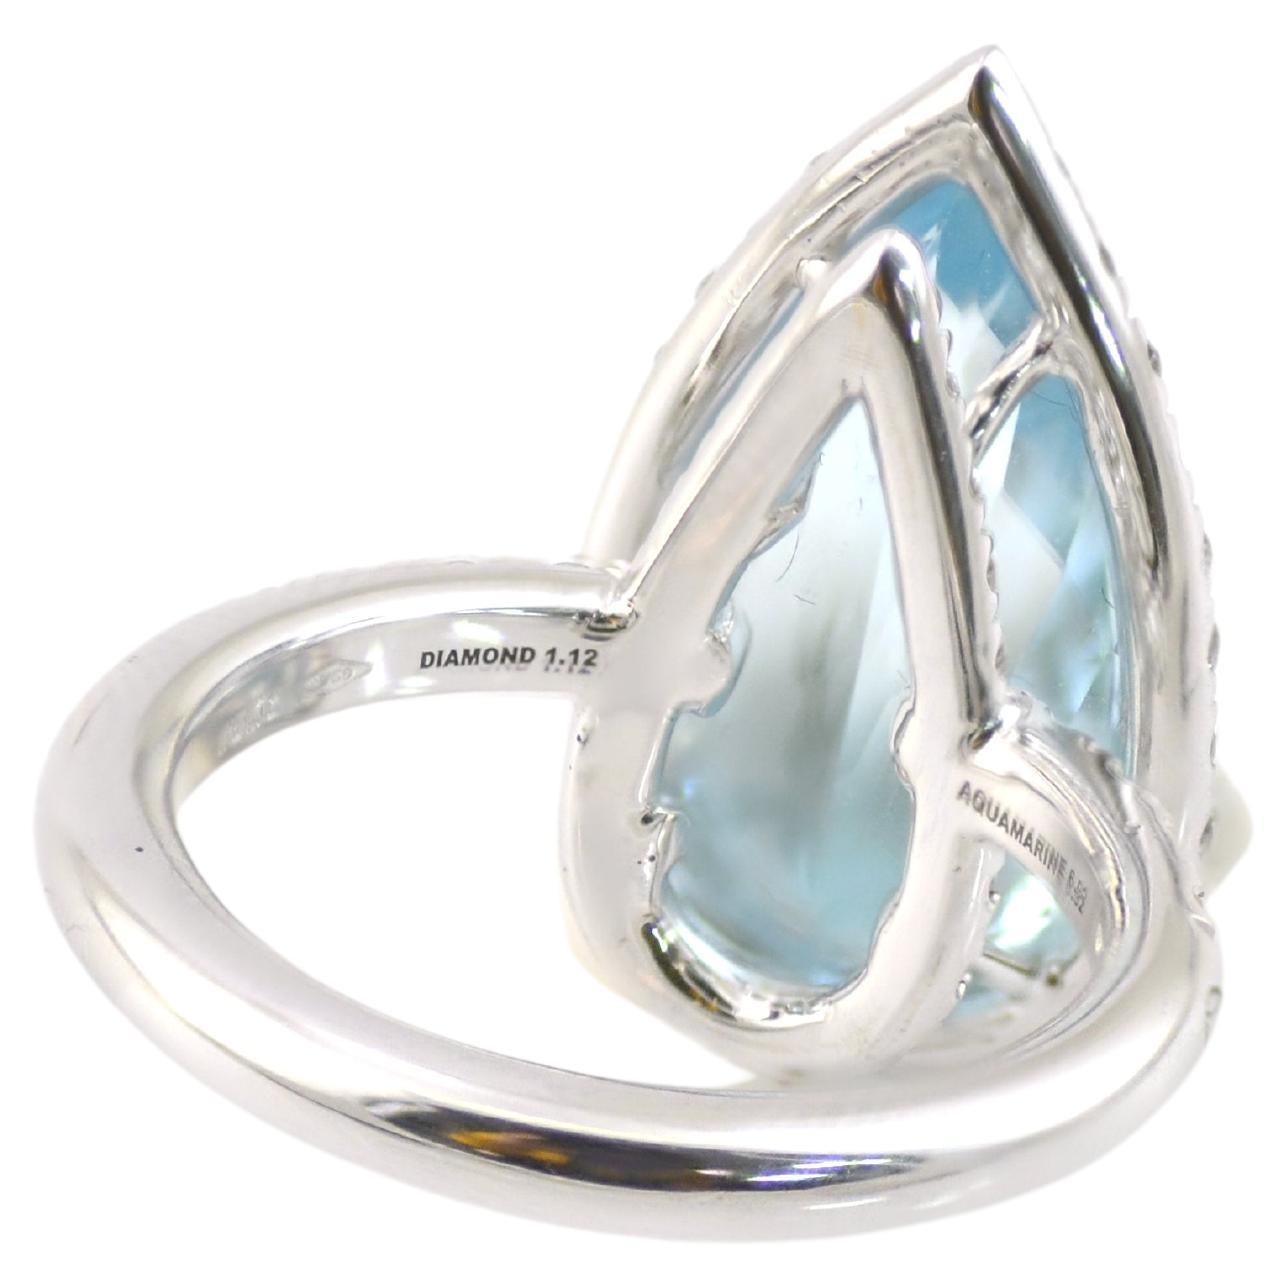 The enchanting Aquamarine Ring is centering a Brazilian Pear cut aquamarine surrounded by 55 high quality diamonds 
Handmade in Margherita Burgener family workshop, signed and stamped Margherita Burgener

18 kt white gold g 7,03
n.55 diamond  total